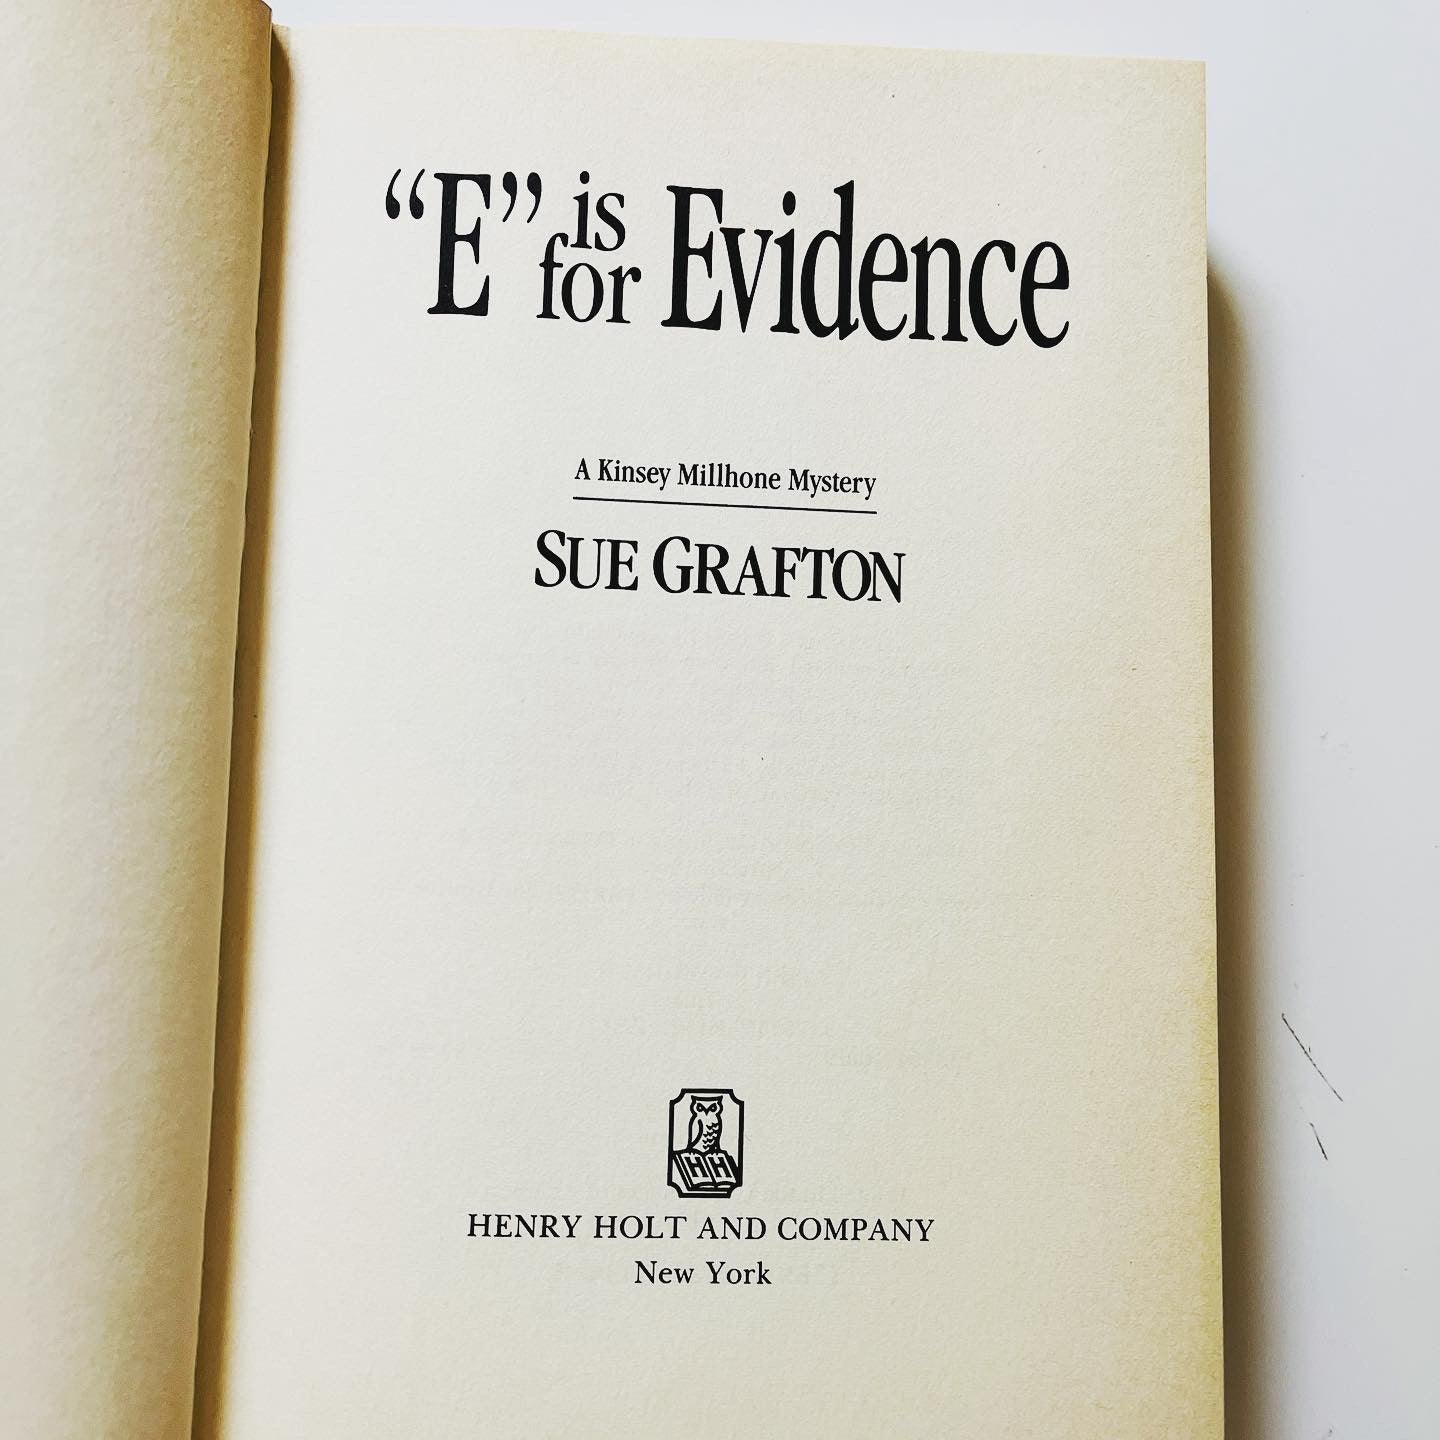 "E" is for Evidence